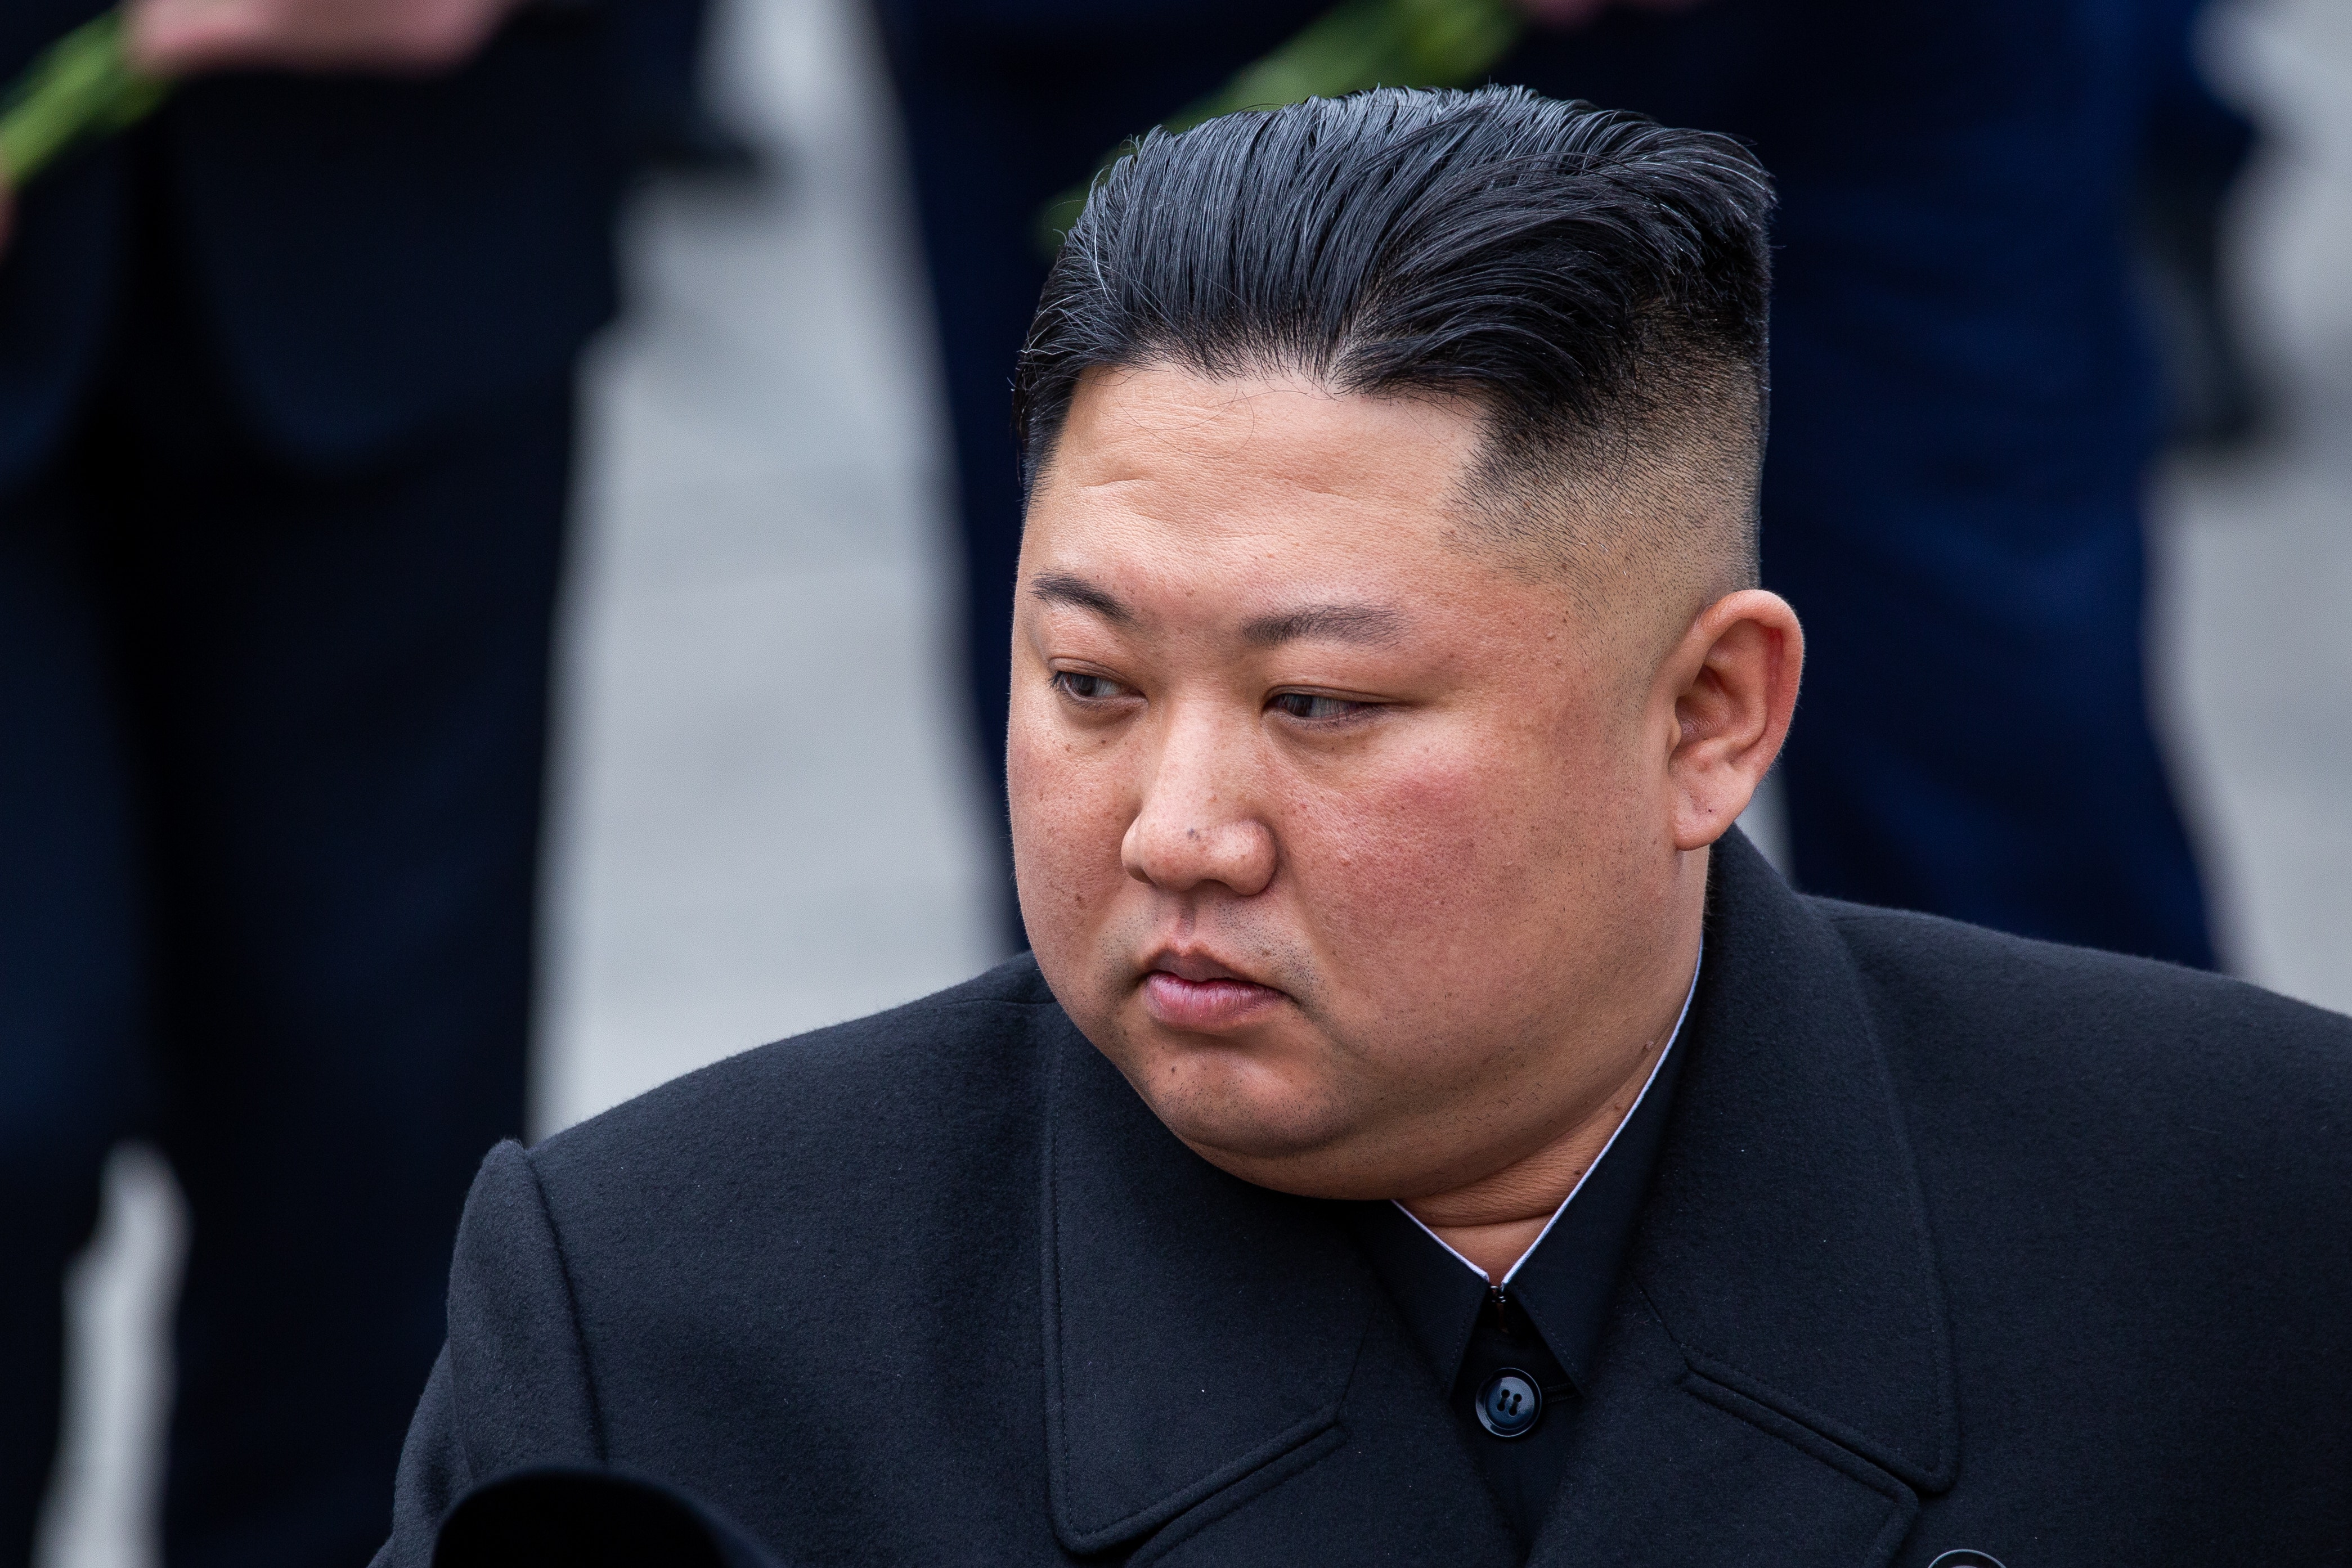 North Korea Ramps Up Security To Protect Kim Jong Un Amid Rising Tensions With US And Allies